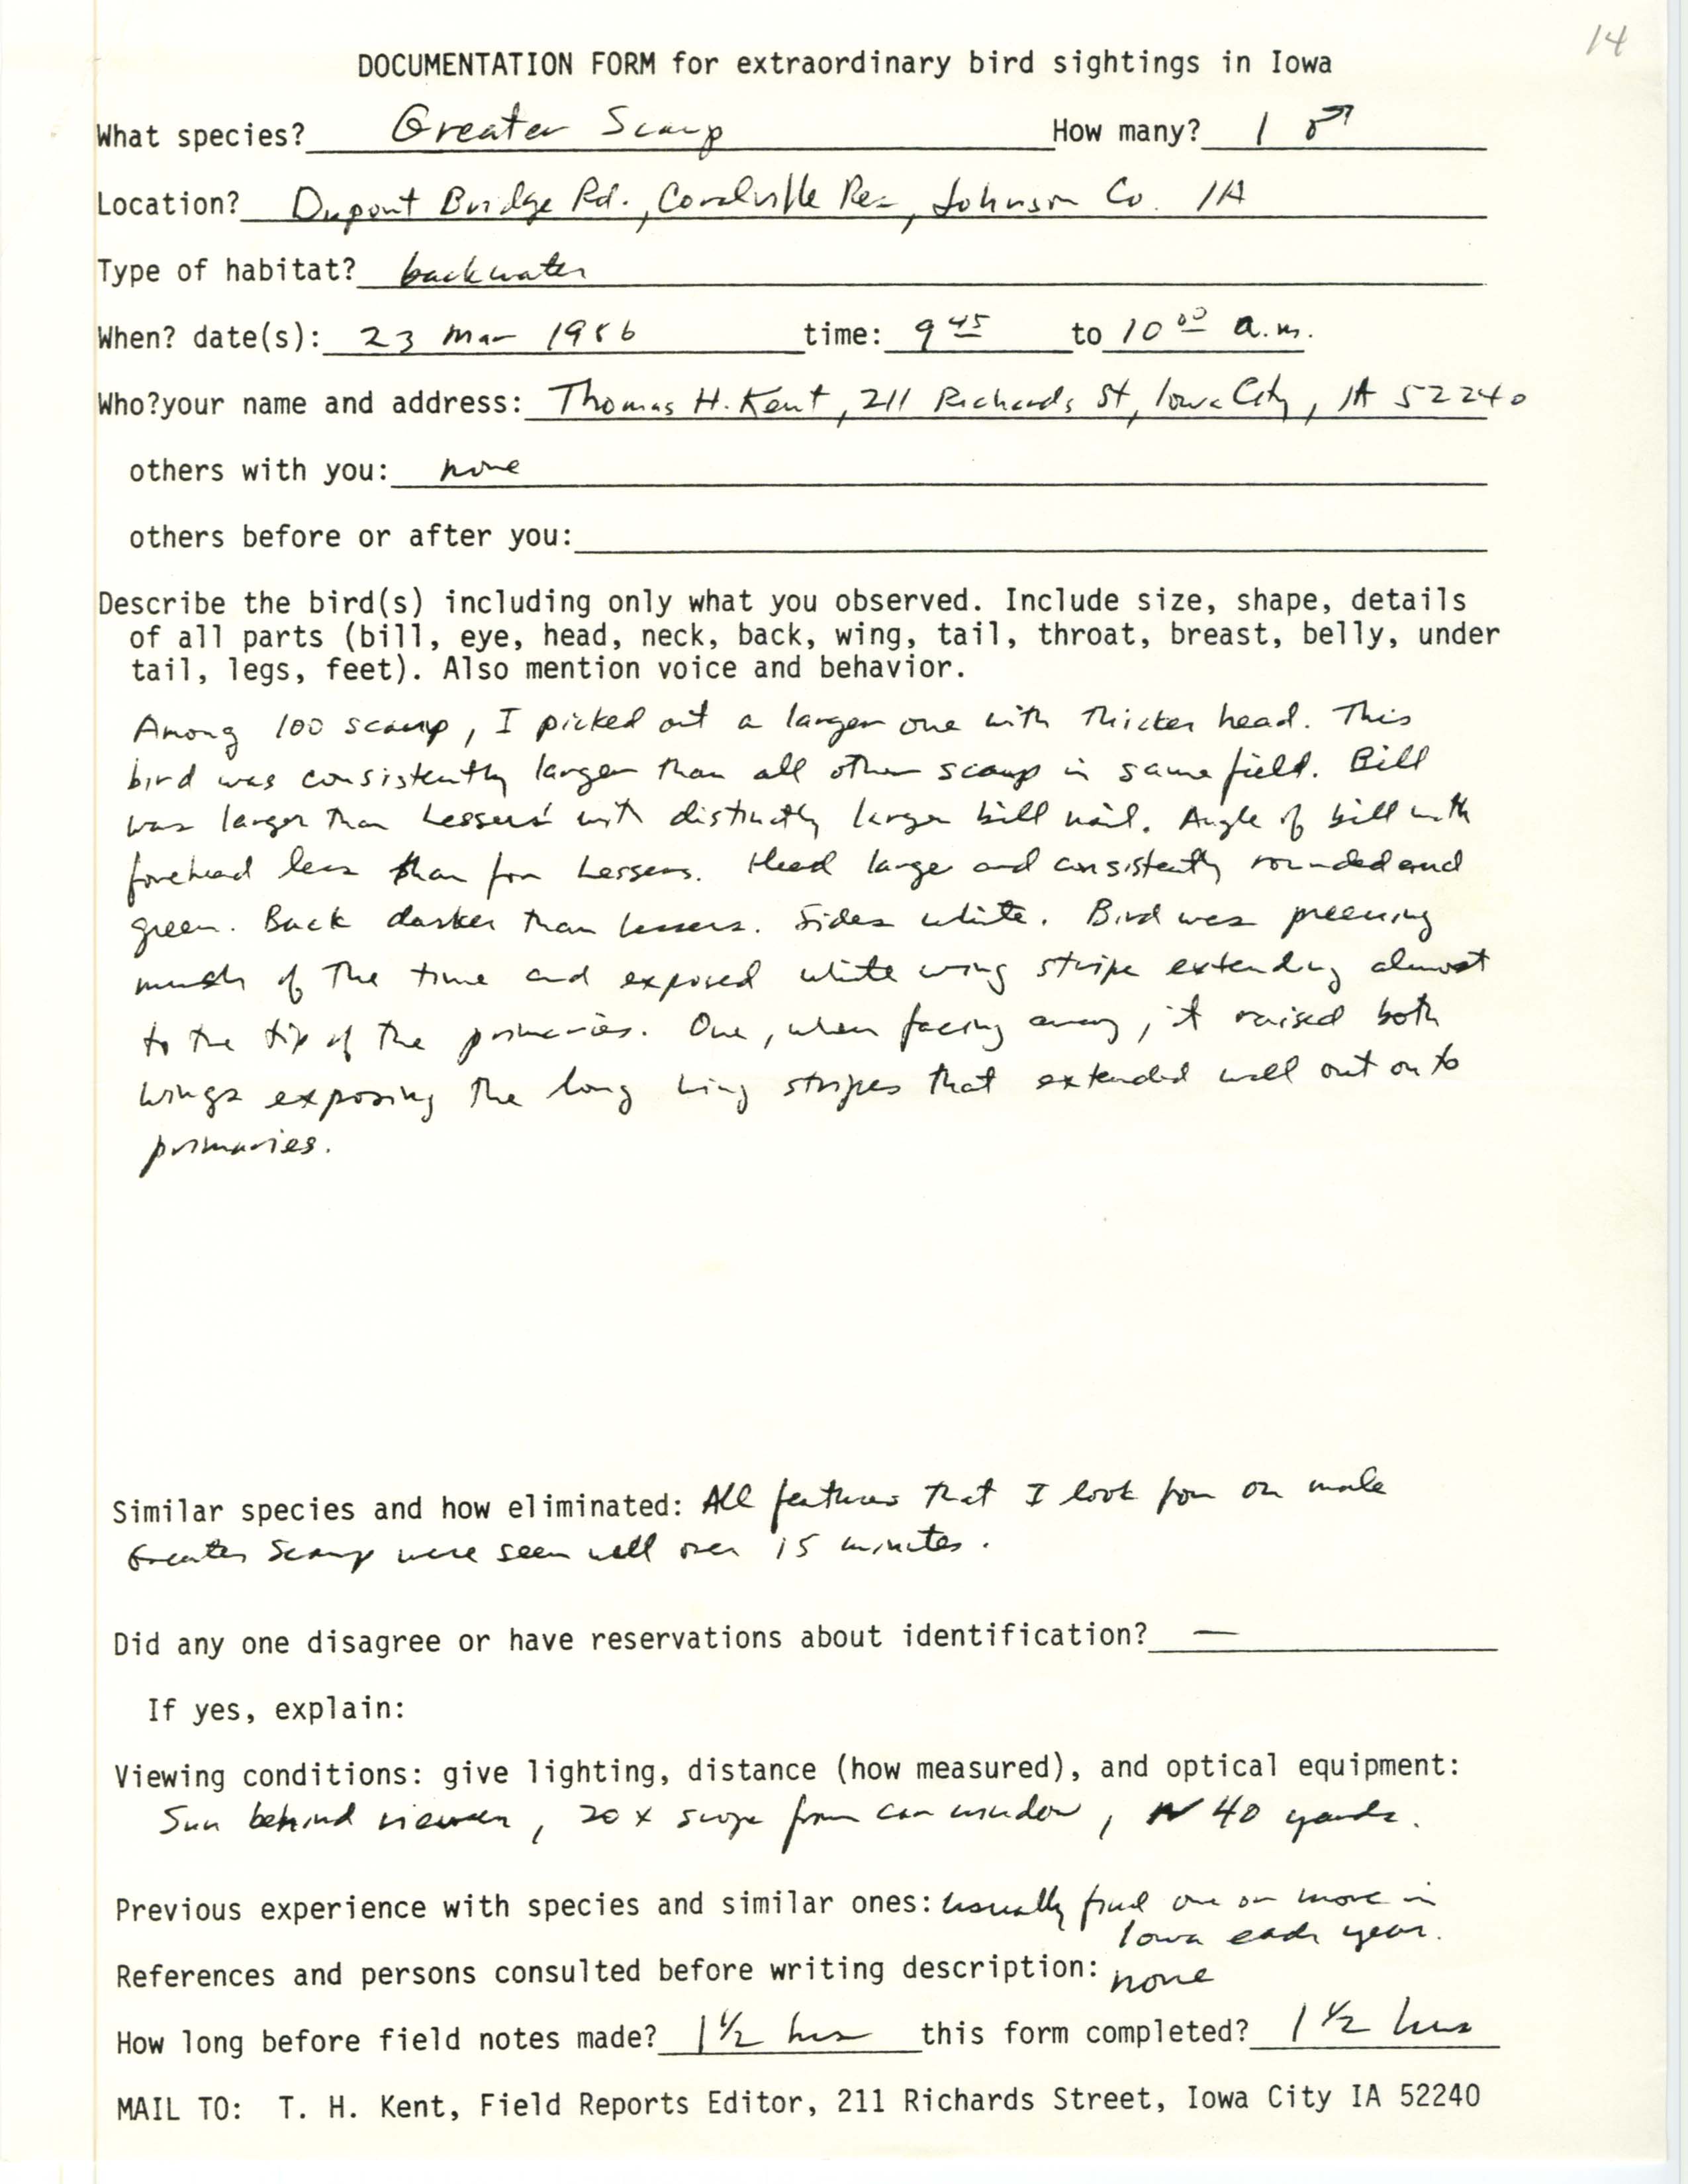 Rare bird documentation form for Greater Scaup at Coralville Reservoir, 1986